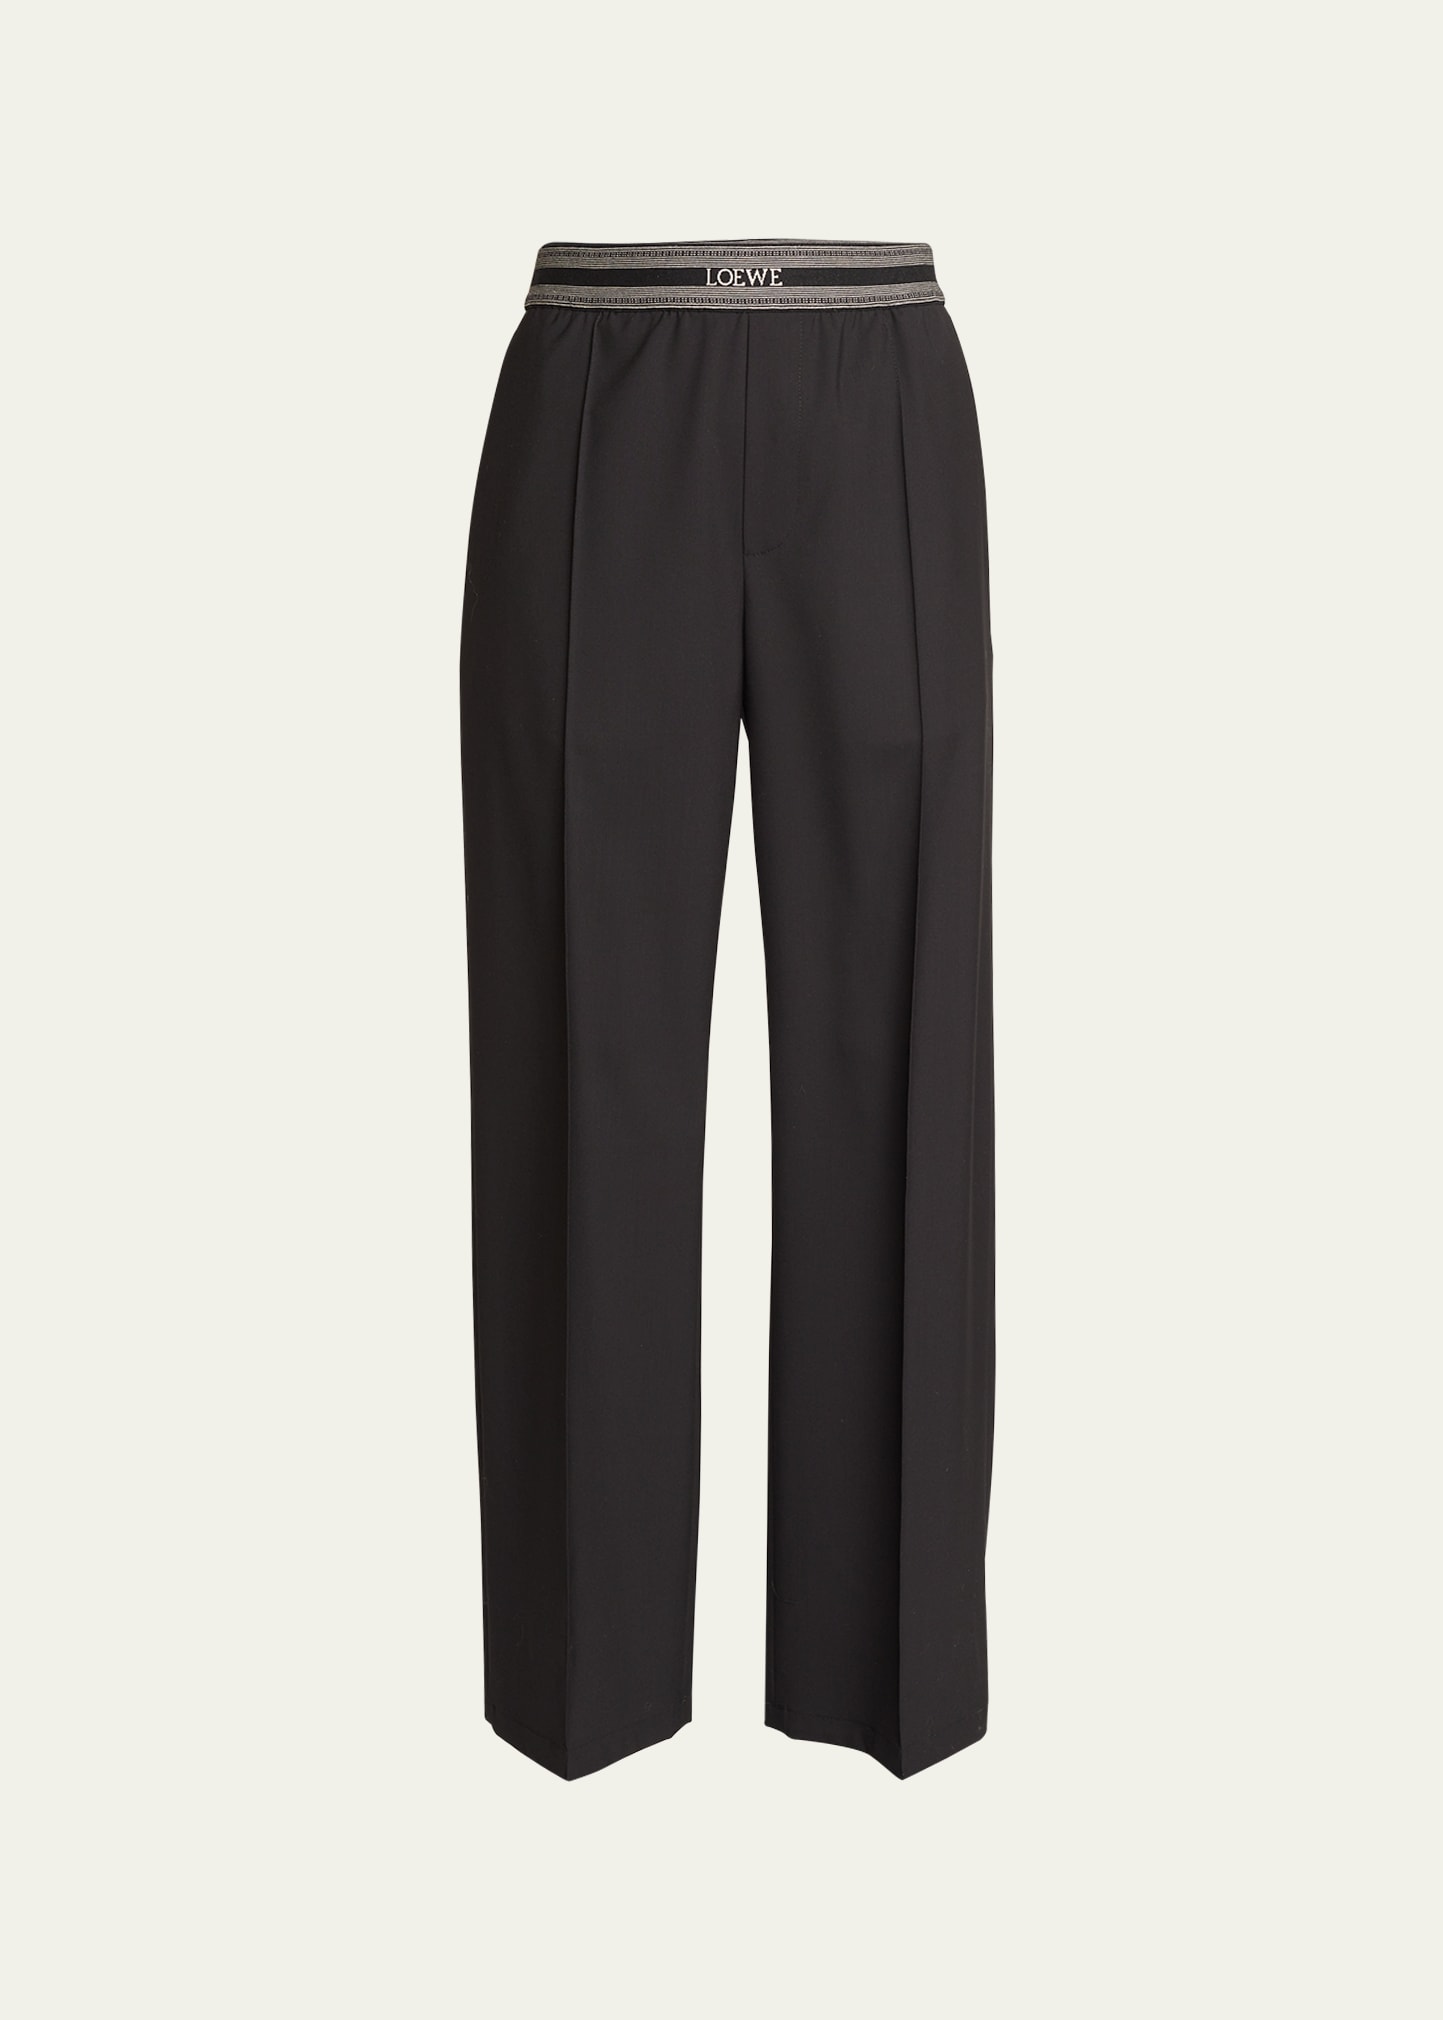 Pleated-Front Trousers with Branded Waistband